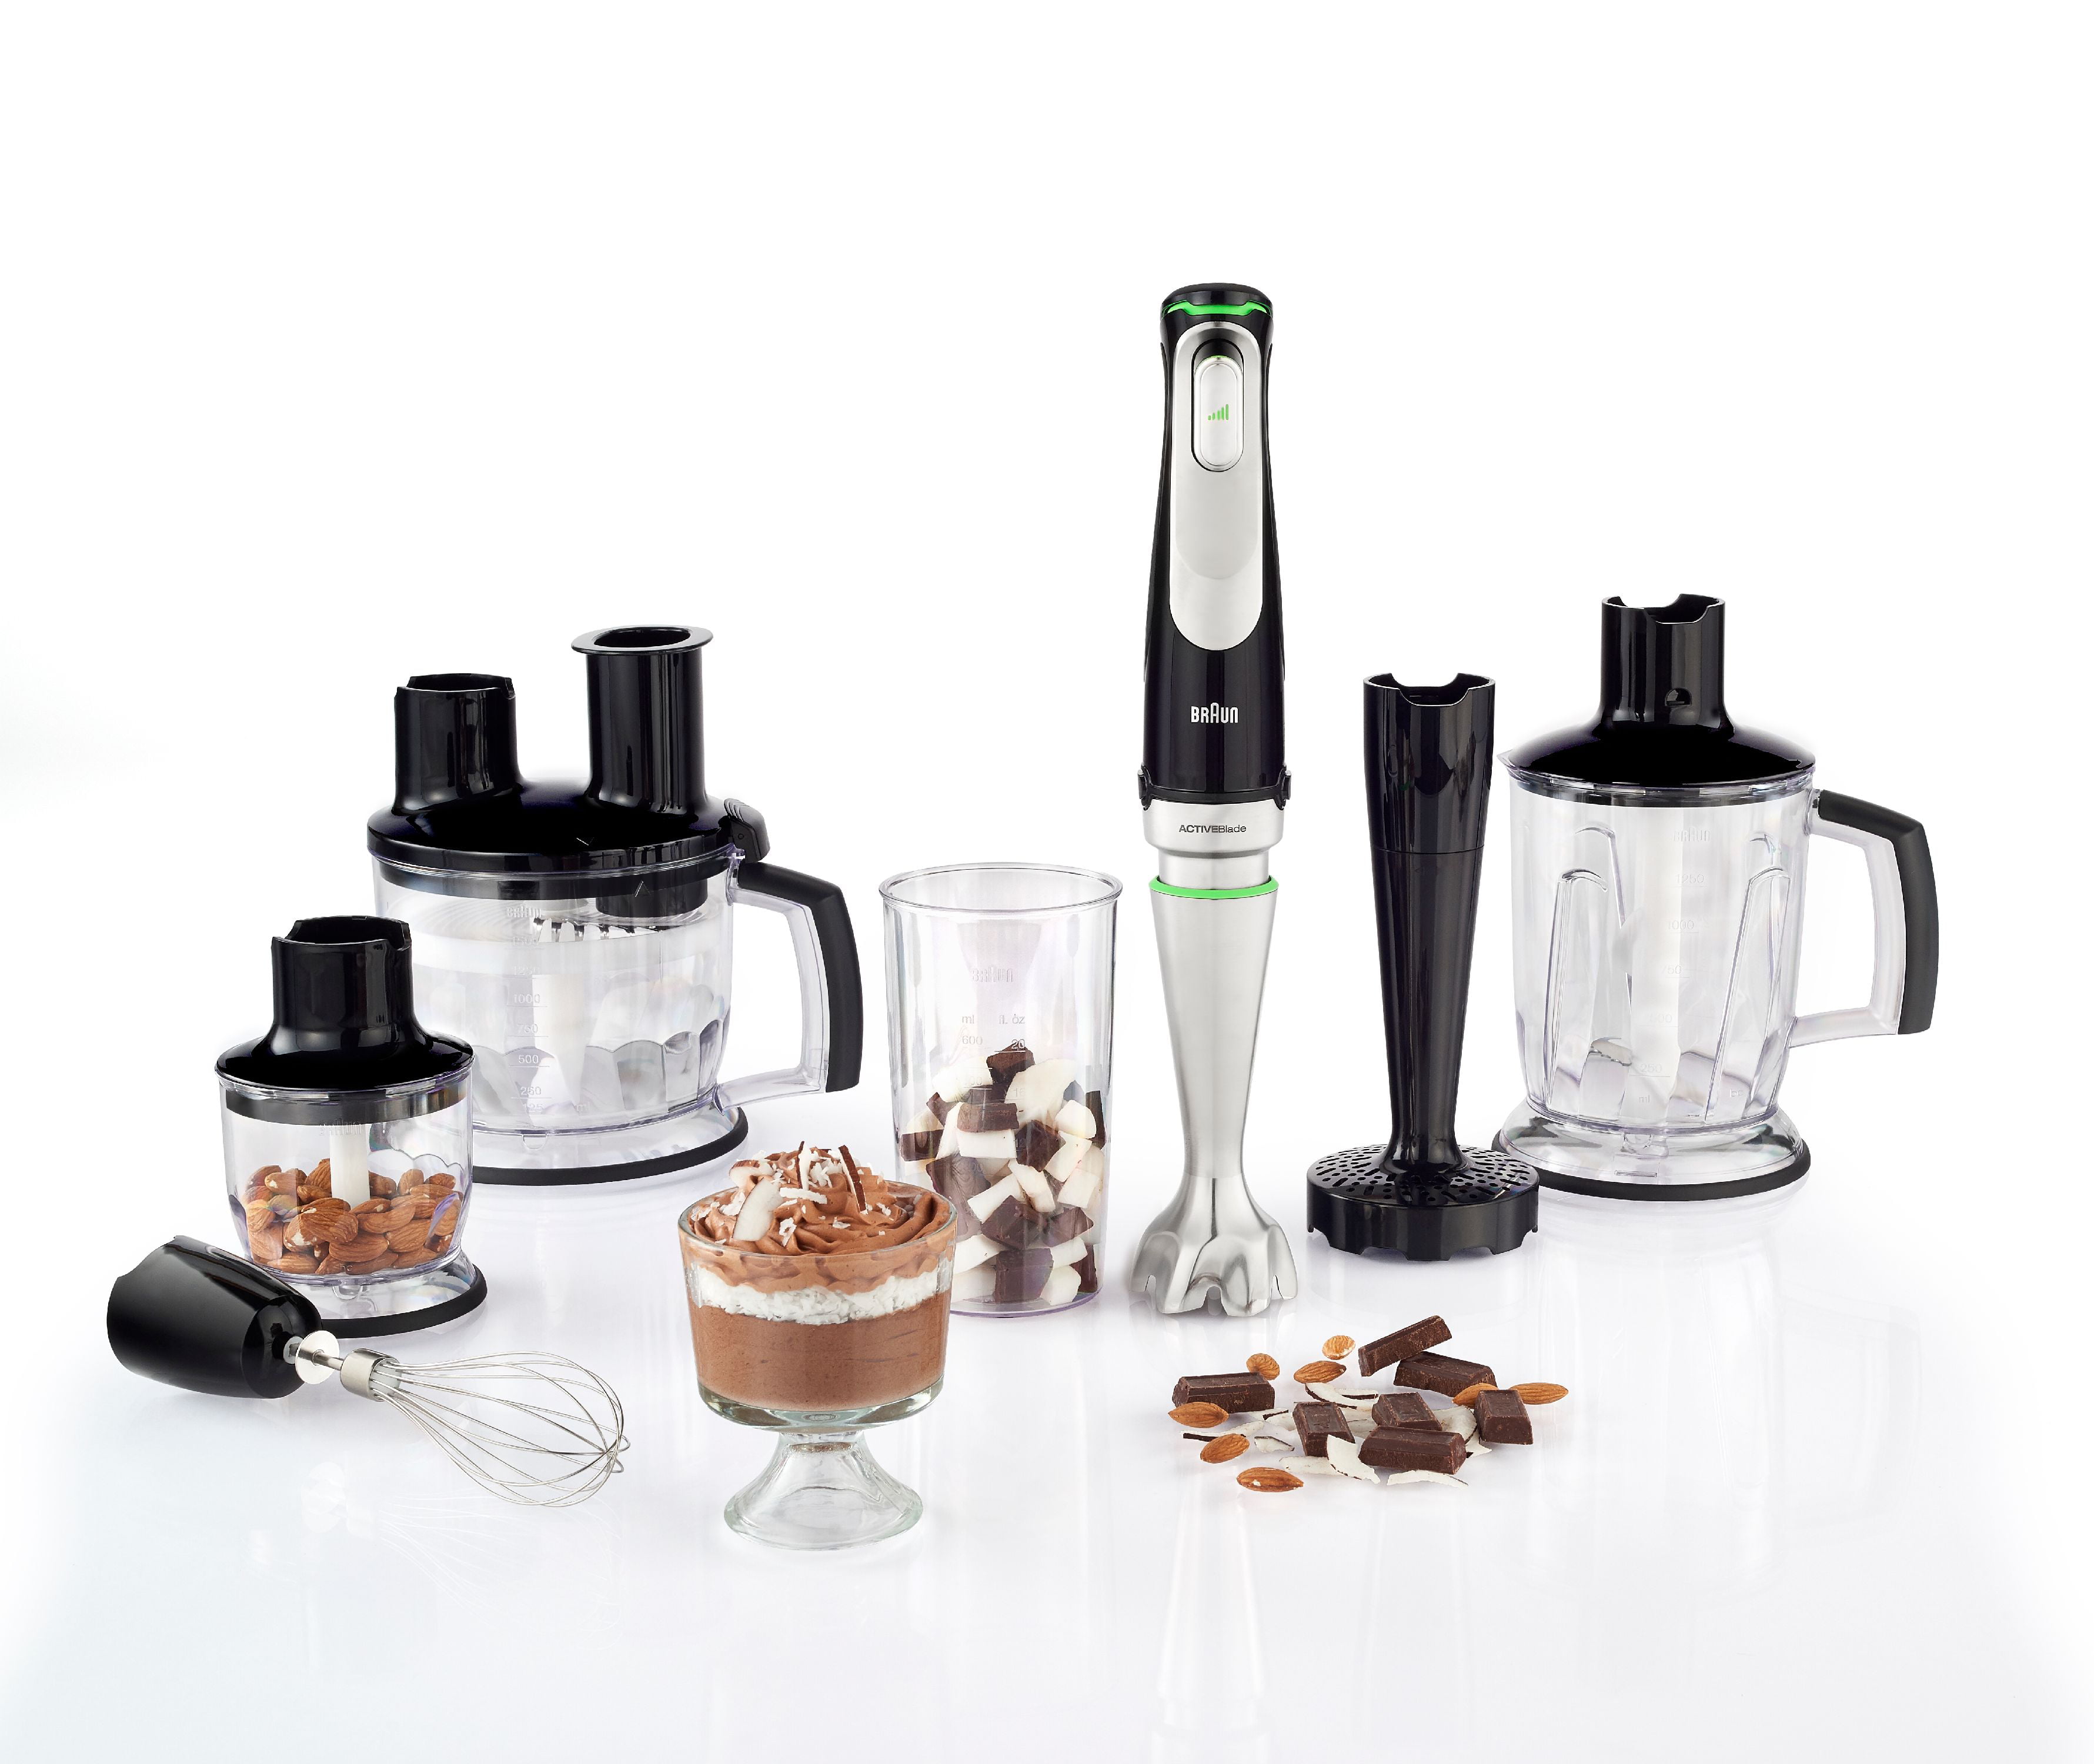 Braun Multiquick 9 Blender with Active Technology and Food Processor Attachment - Walmart.com